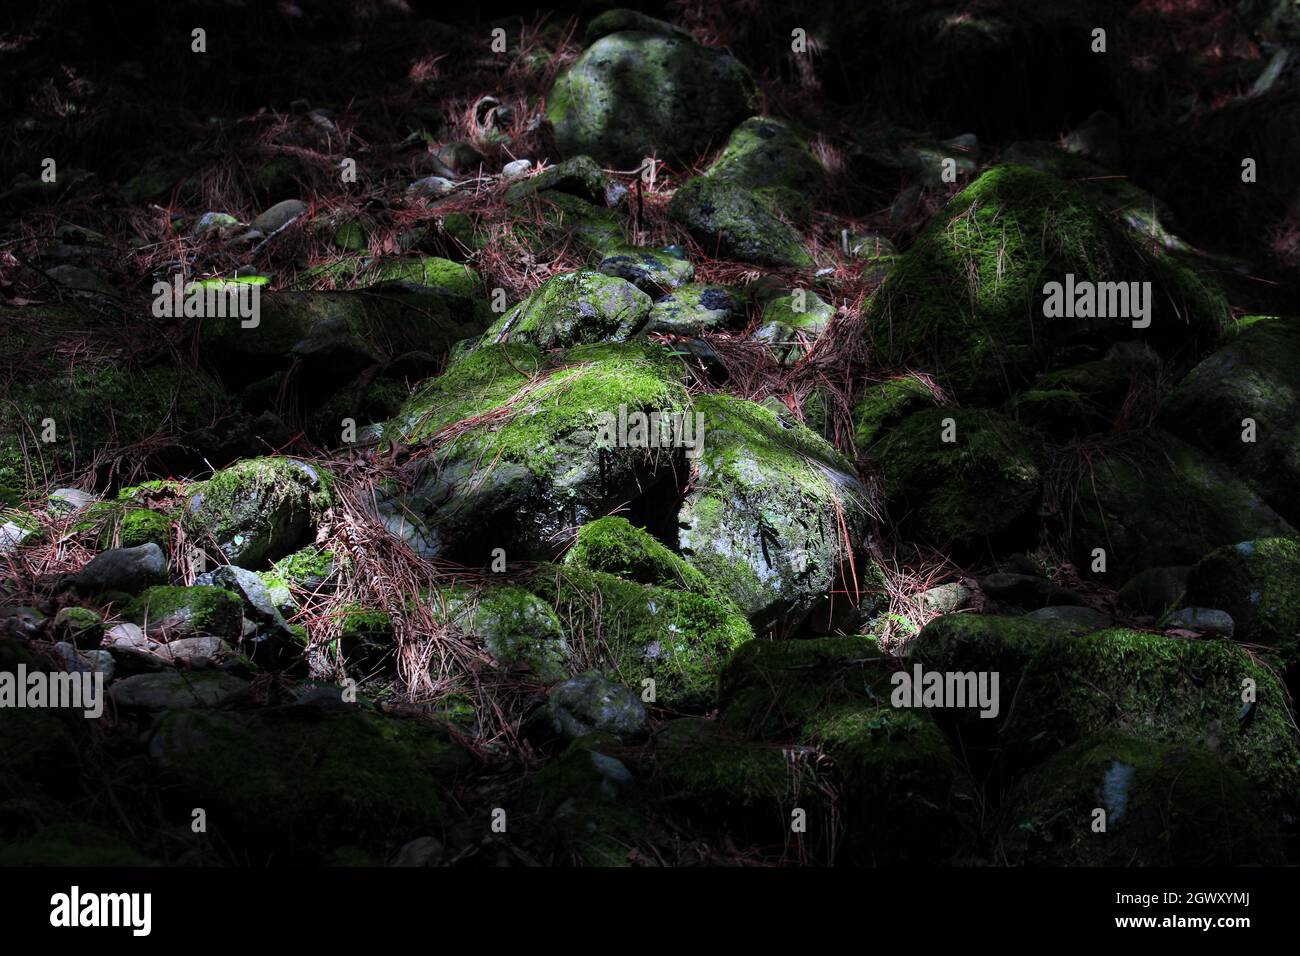 Moss Growing On Rocks In Forest Stock Photo